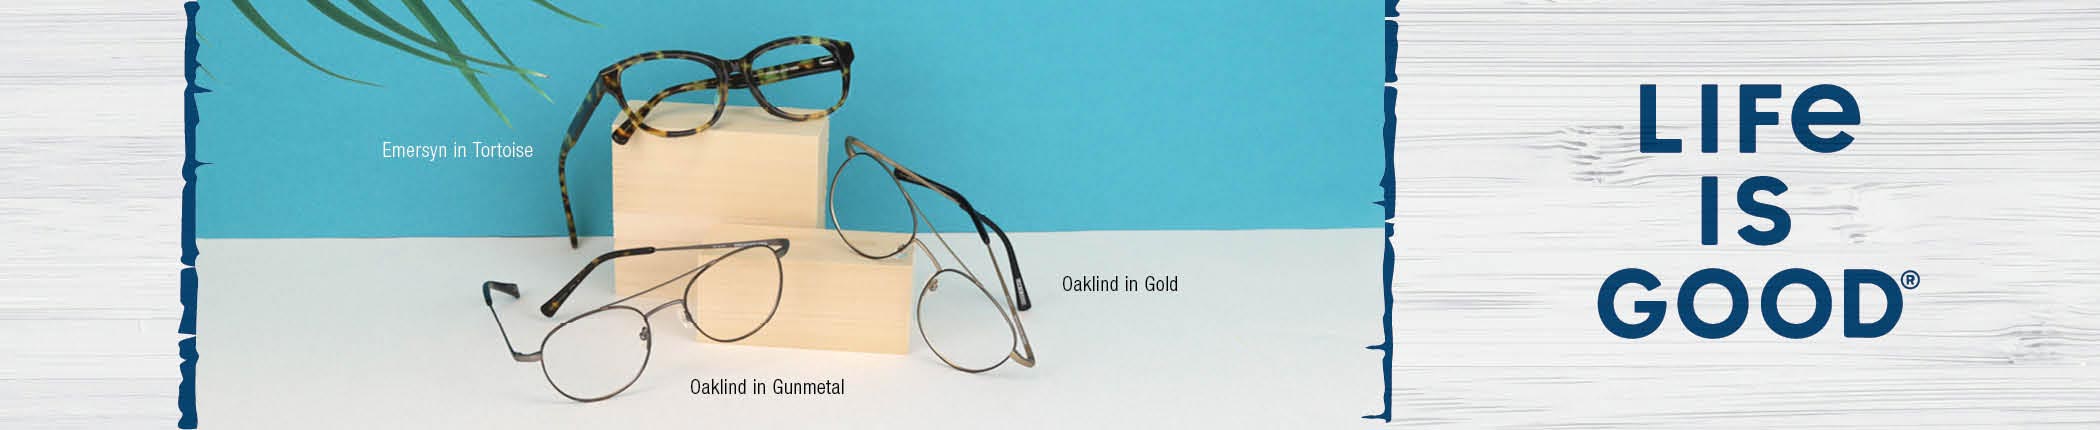 Shop Life is Good Eyeglasses - featuring Life is Good Oaklind and Life is Good Emersyn